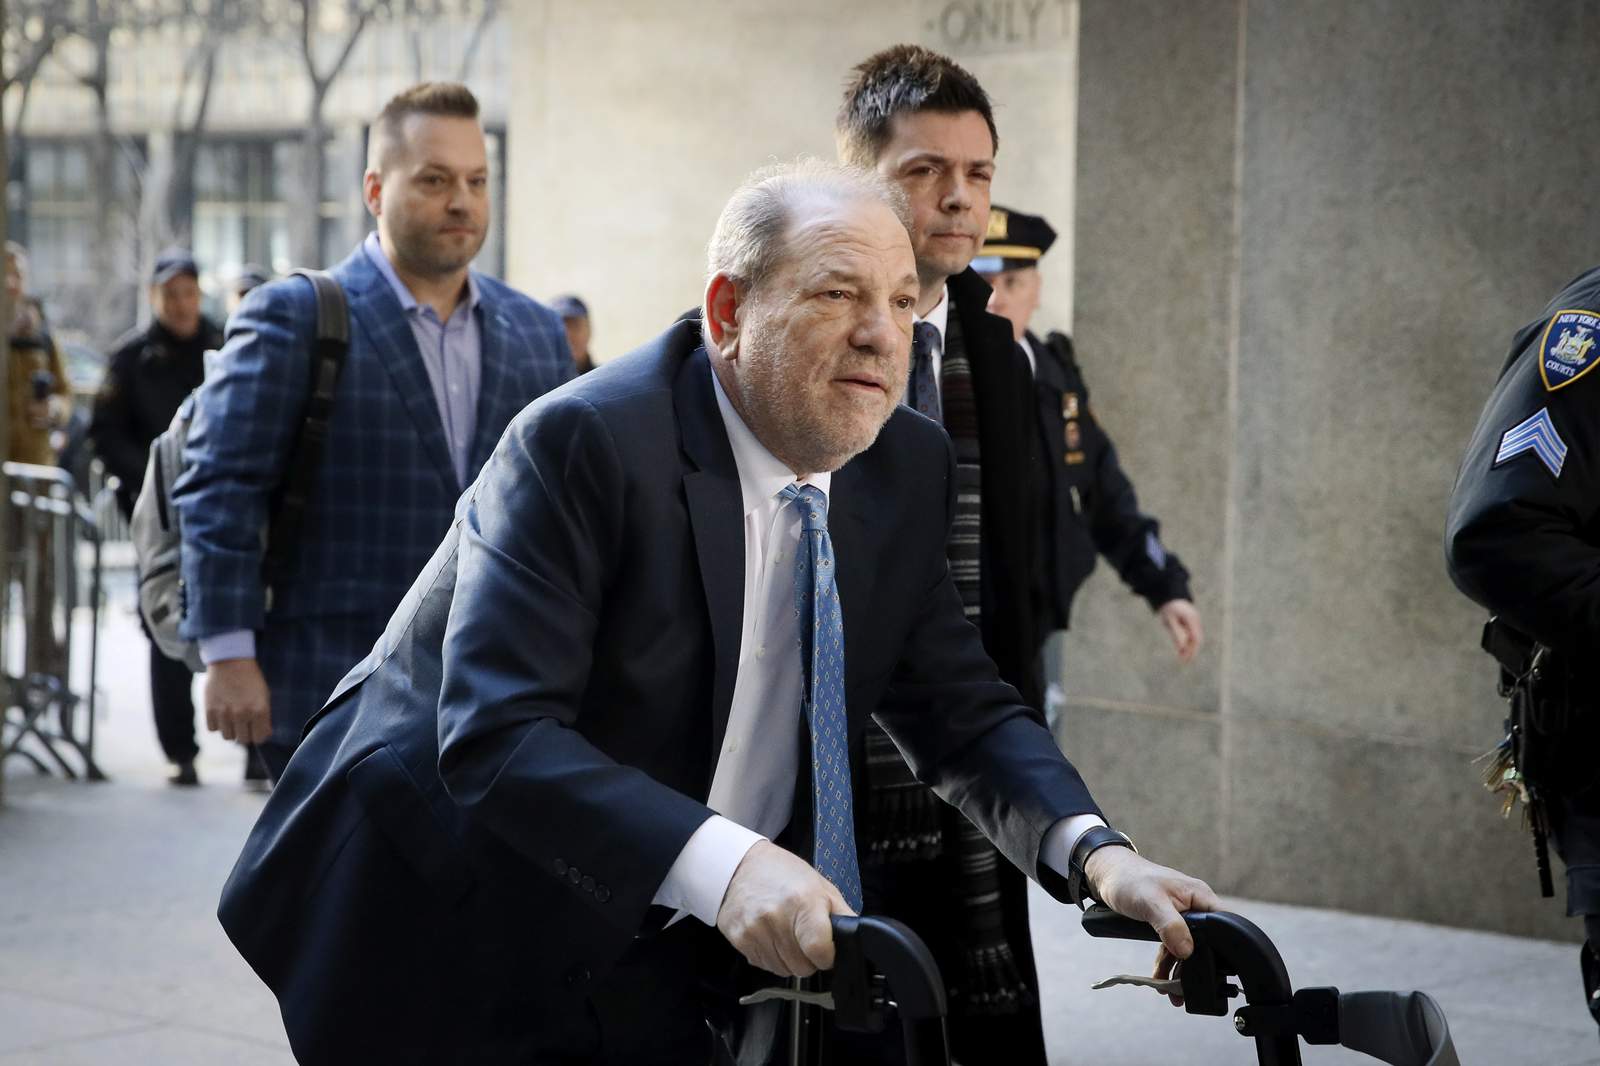 Weinstein gets 23 years in sentence hailed by accusers